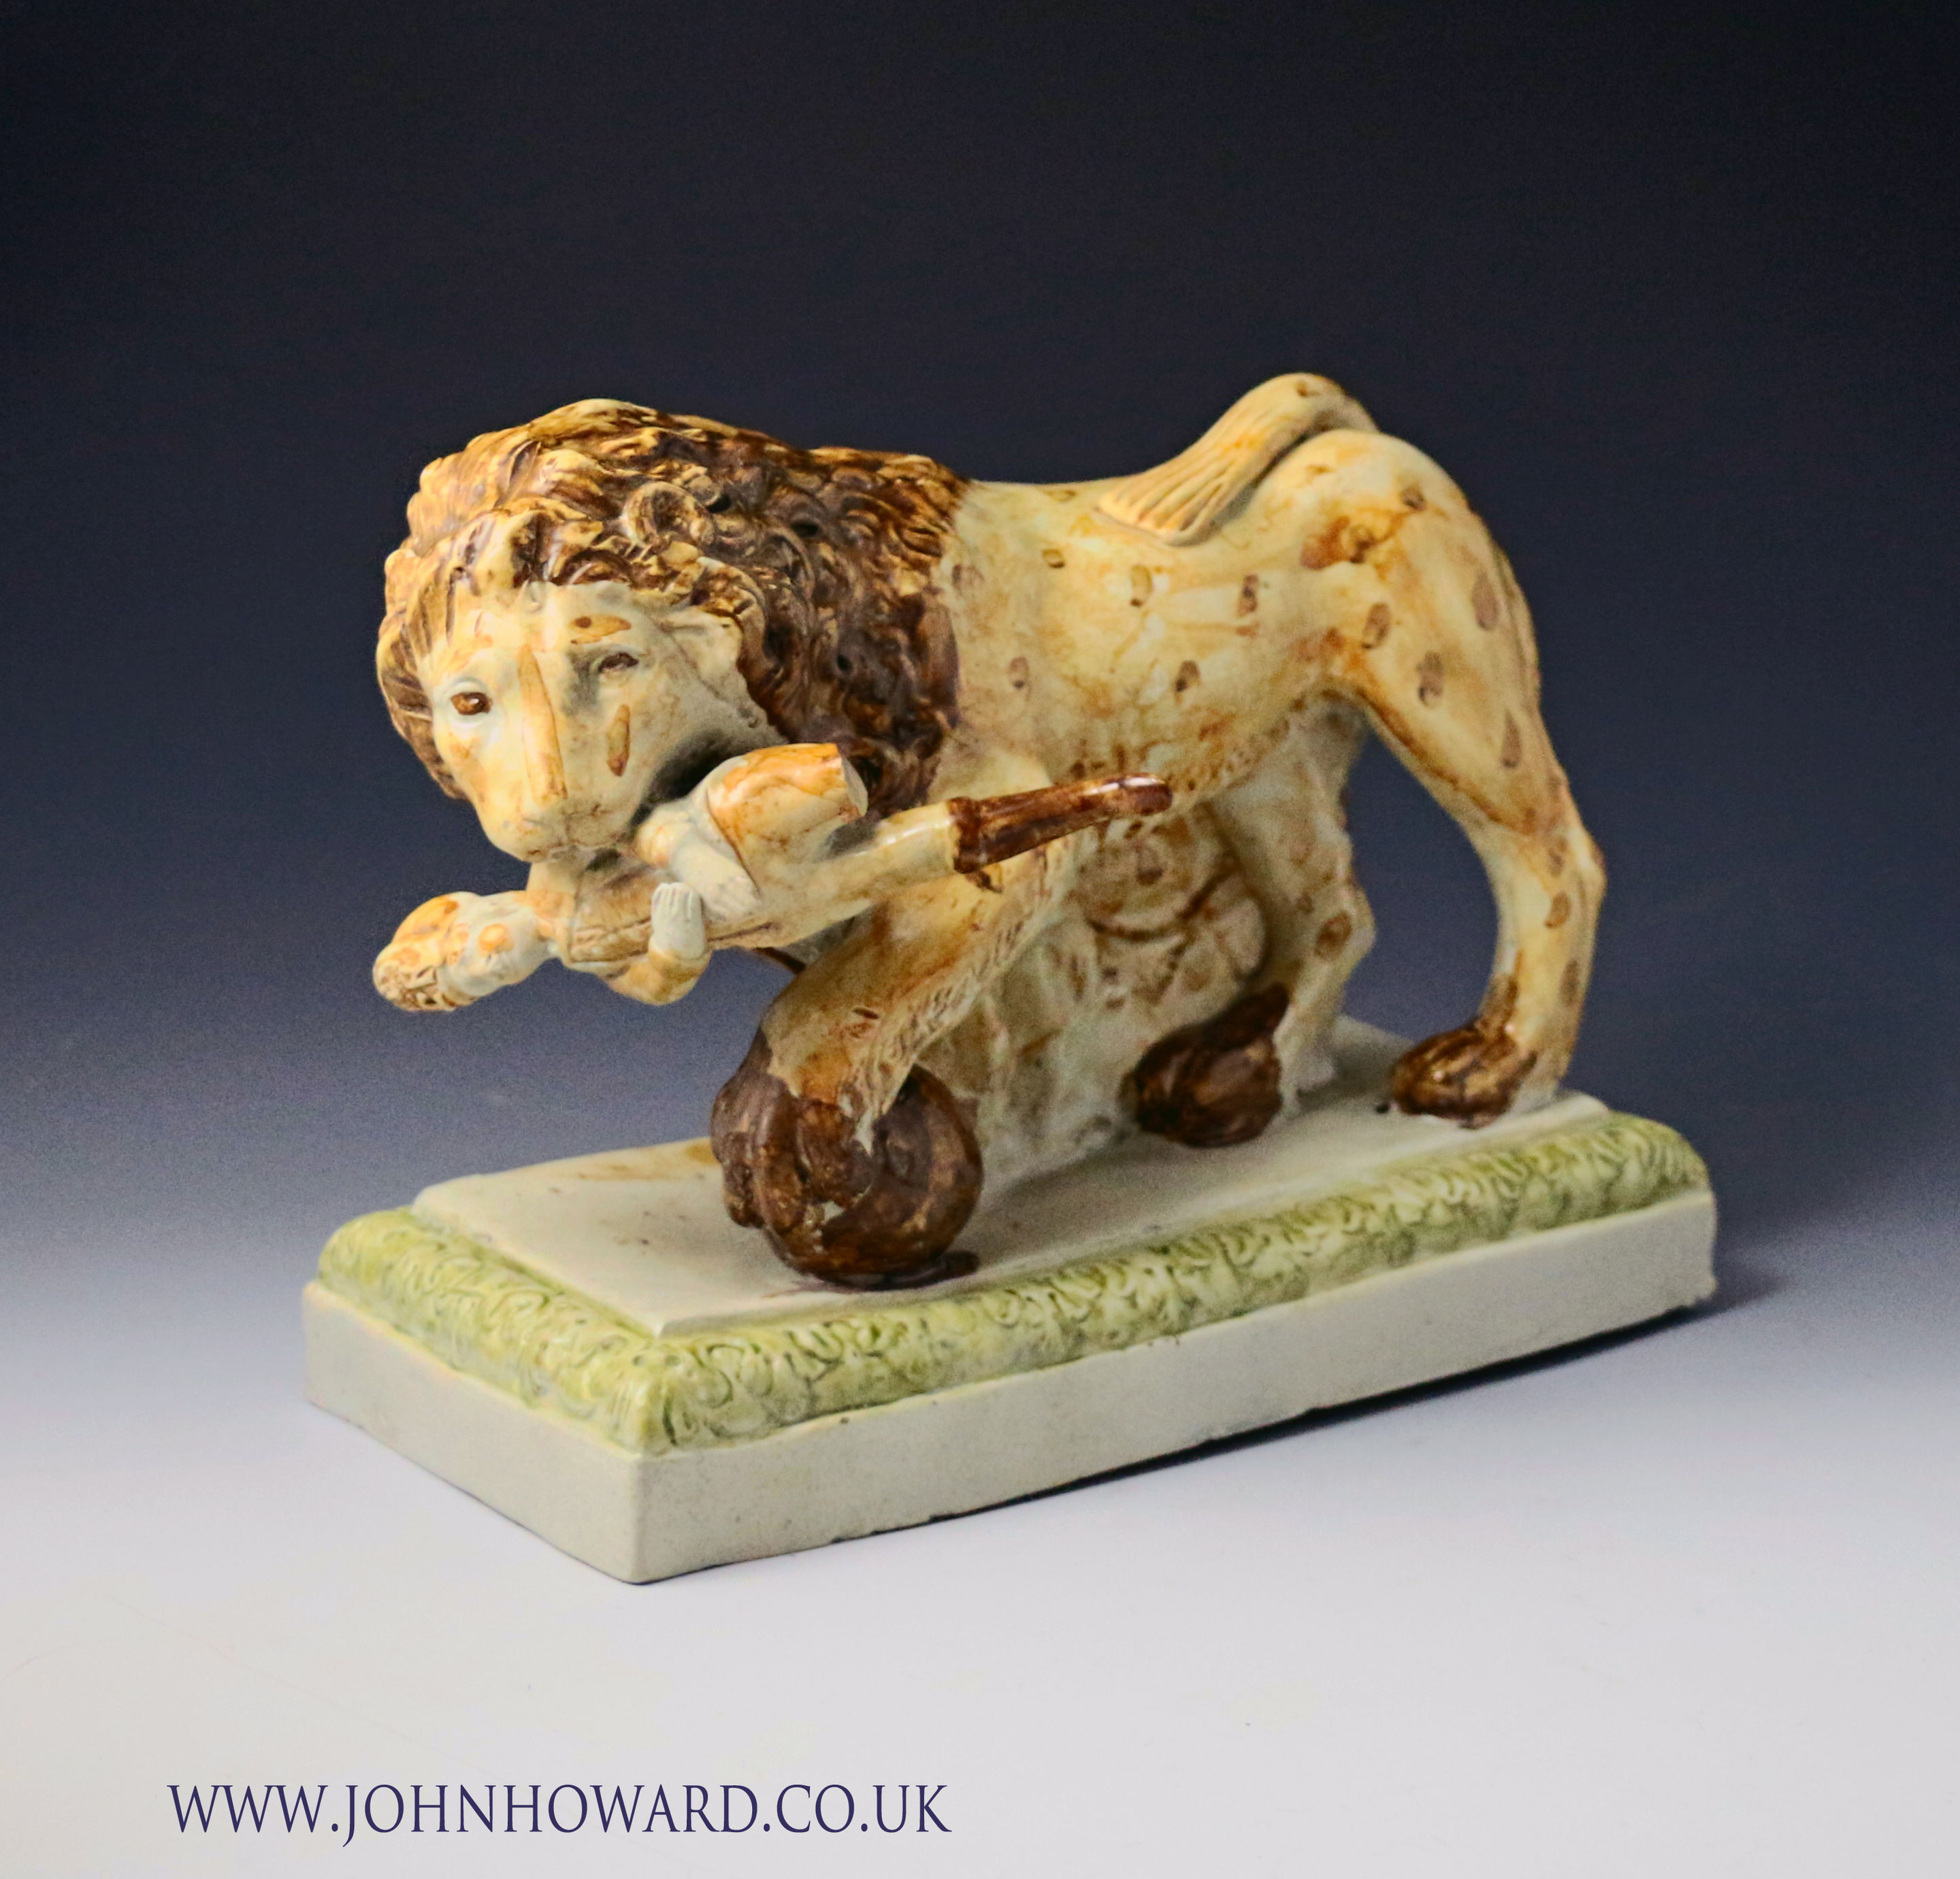 Antique Staffordshire pottery figure of a lion  an English soldier in his jaws late 18th century